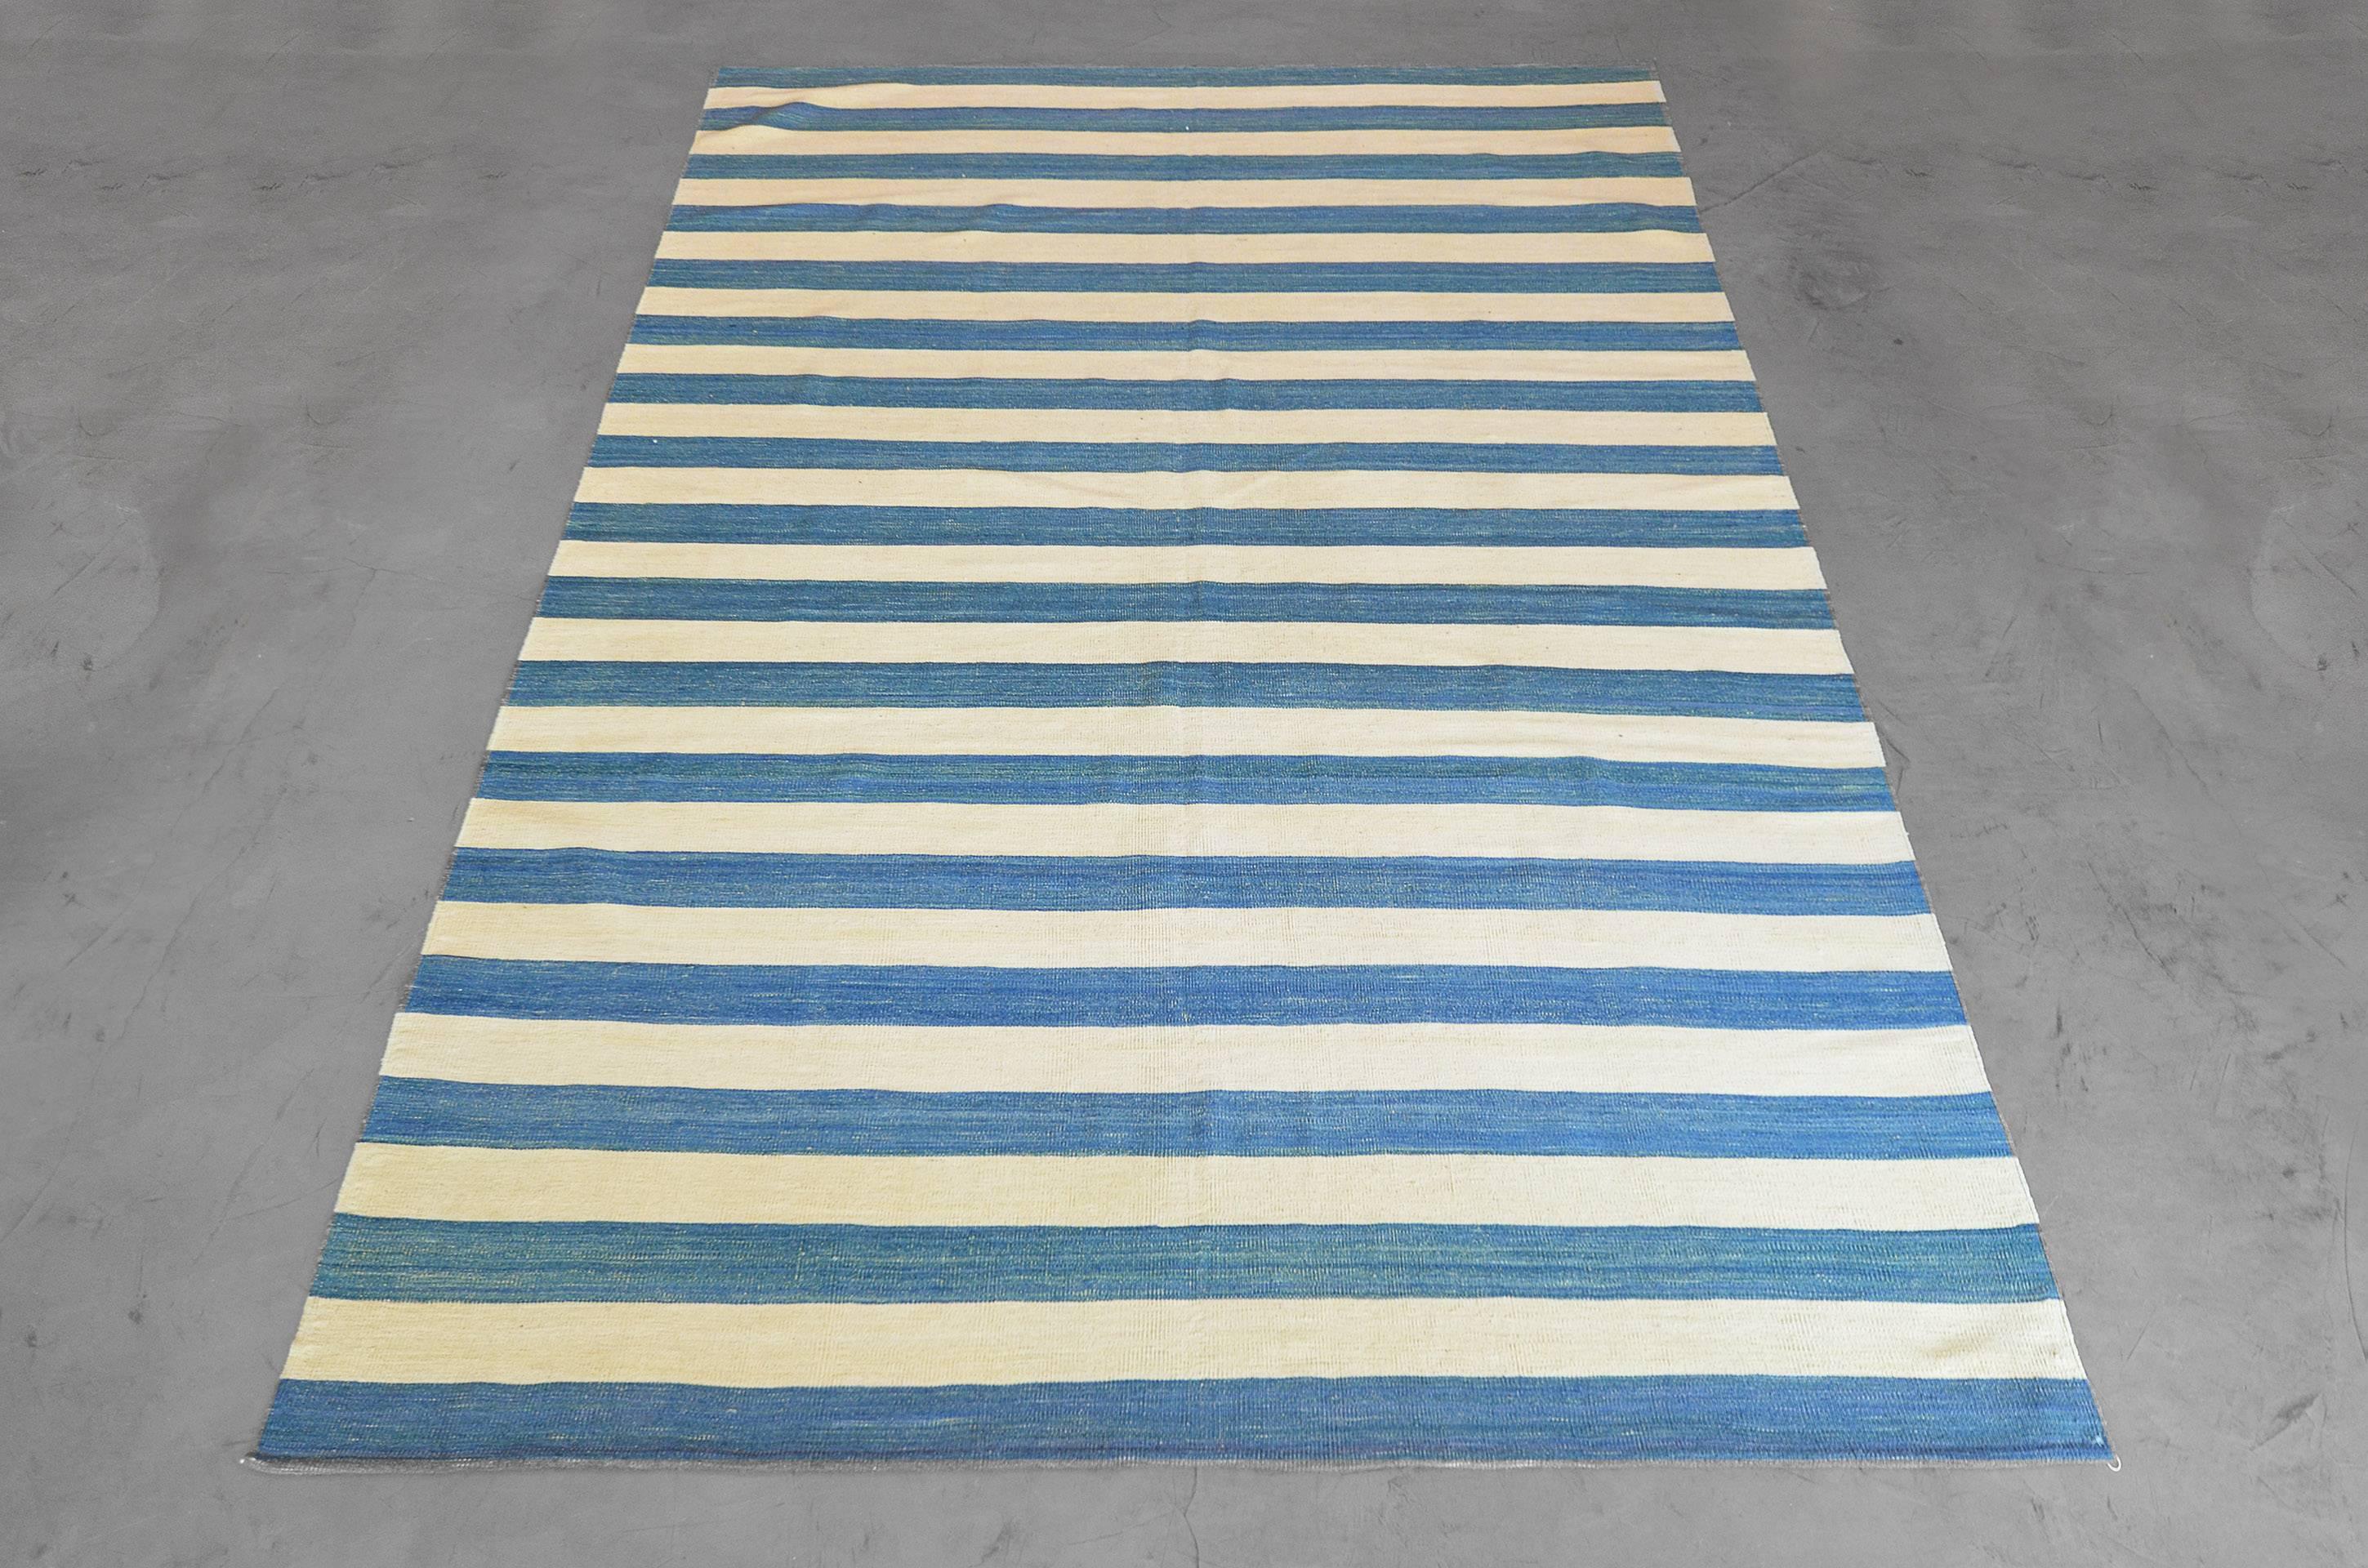 Indigo blue and natural wool form Classic stripes that create great foundations for transitional, costal, clean and modern rooms. The rug is nearly square at 6.3” x 6.9” and newly flat woven using the finest wool from Turkey.